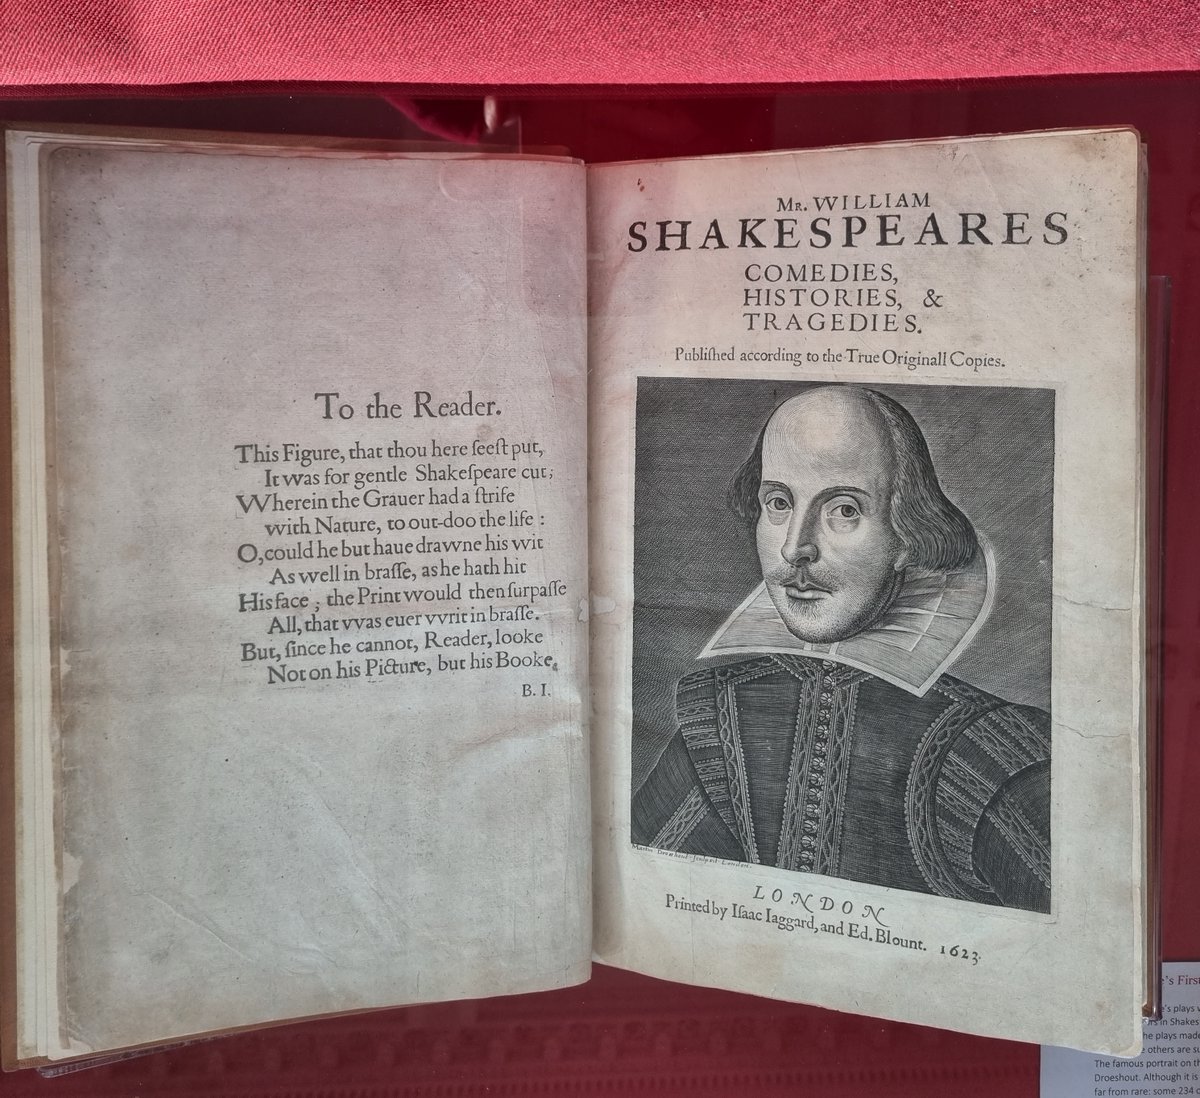 To celebrate the 400th anniversary of #Shakespeare’s #FirstFolio (registered #otd in1623), the two copies in the #WrenLibrary collection are now on display! Find them in the first exhibition case at your right when entering the Library (Mon-Fri 12-2; Sat 10.30-12.30).